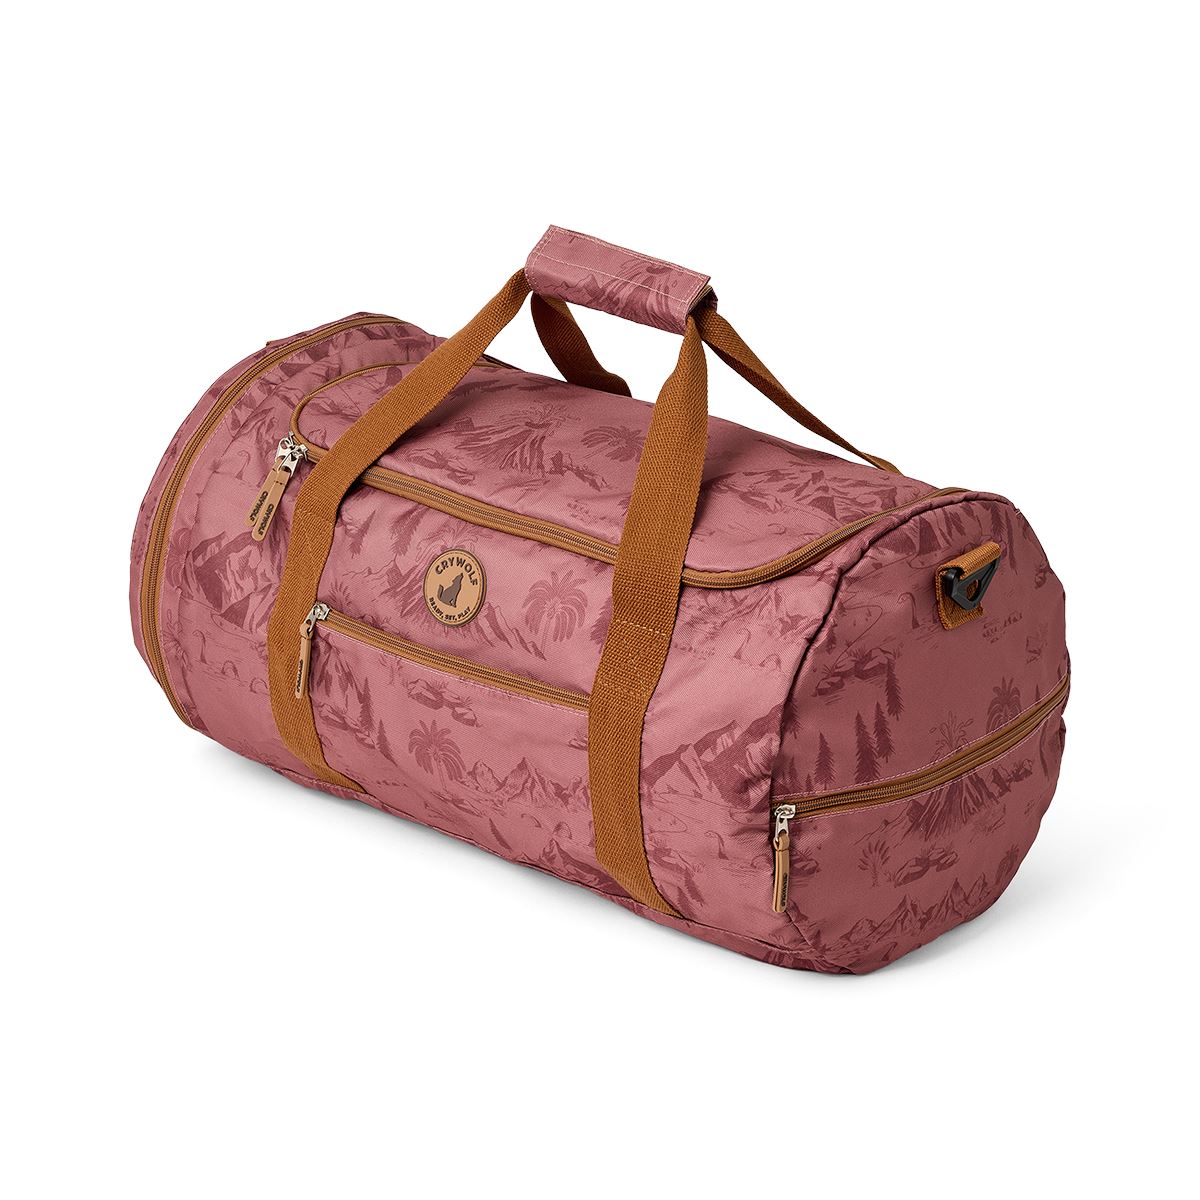 Crywolf Packable Duffel - Rose Landscape Duffle Bags Crywolf 